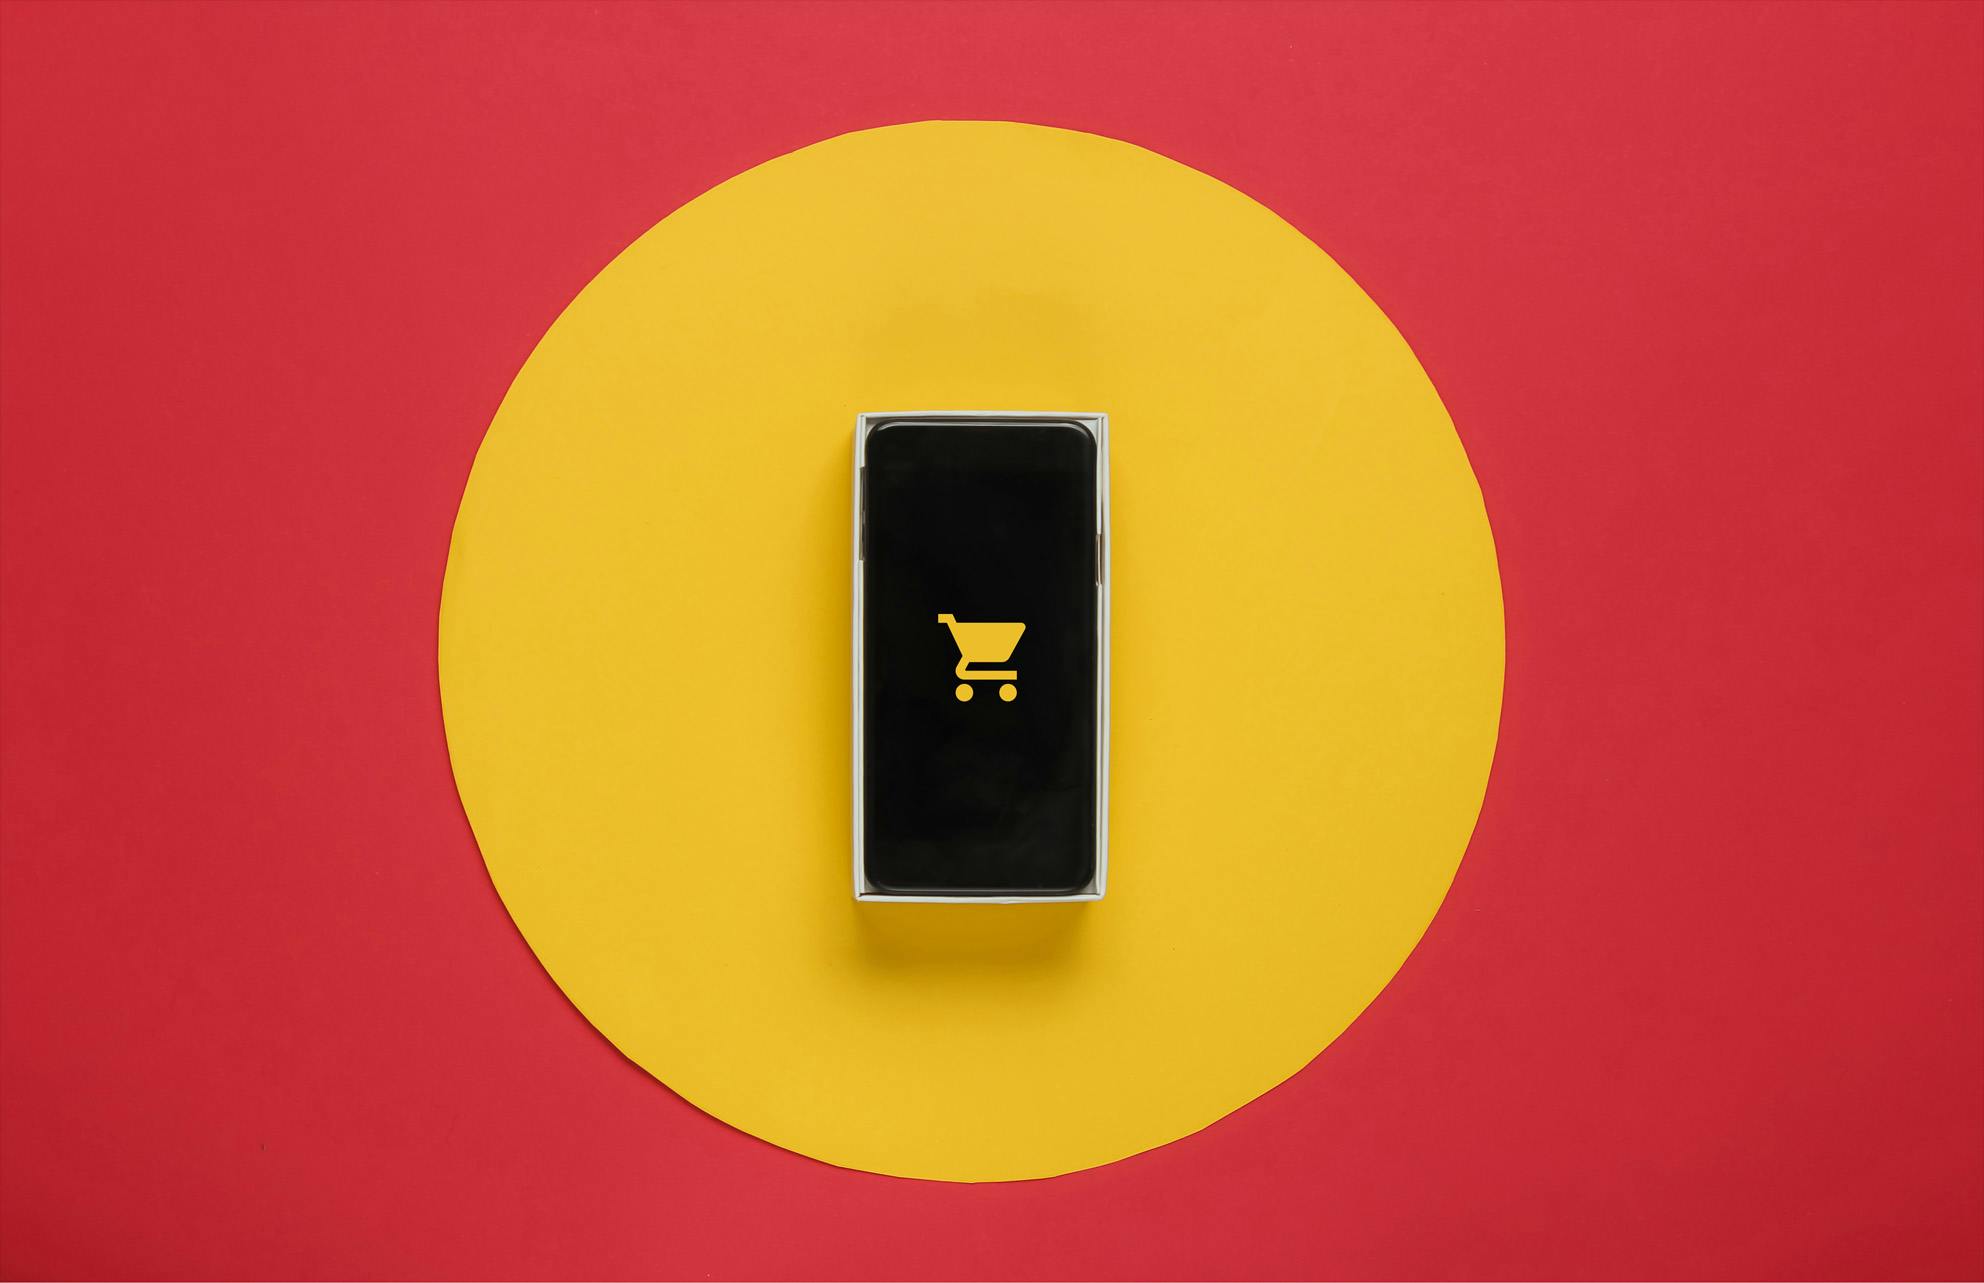 mobile phone with shopping cart icon on yellow circle on red background